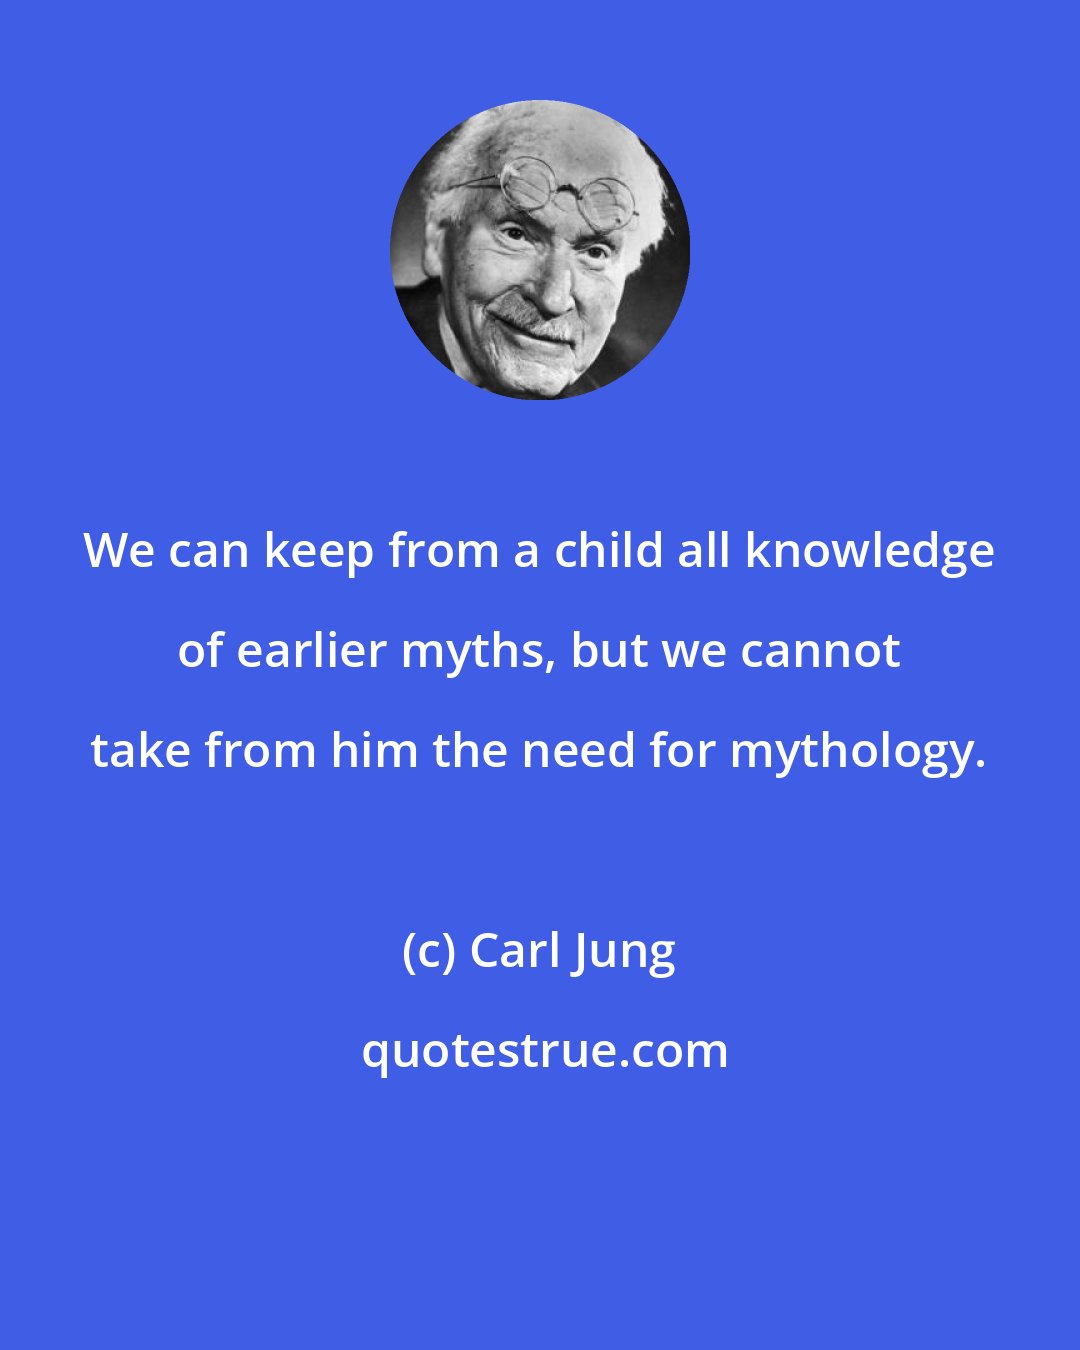 Carl Jung: We can keep from a child all knowledge of earlier myths, but we cannot take from him the need for mythology.